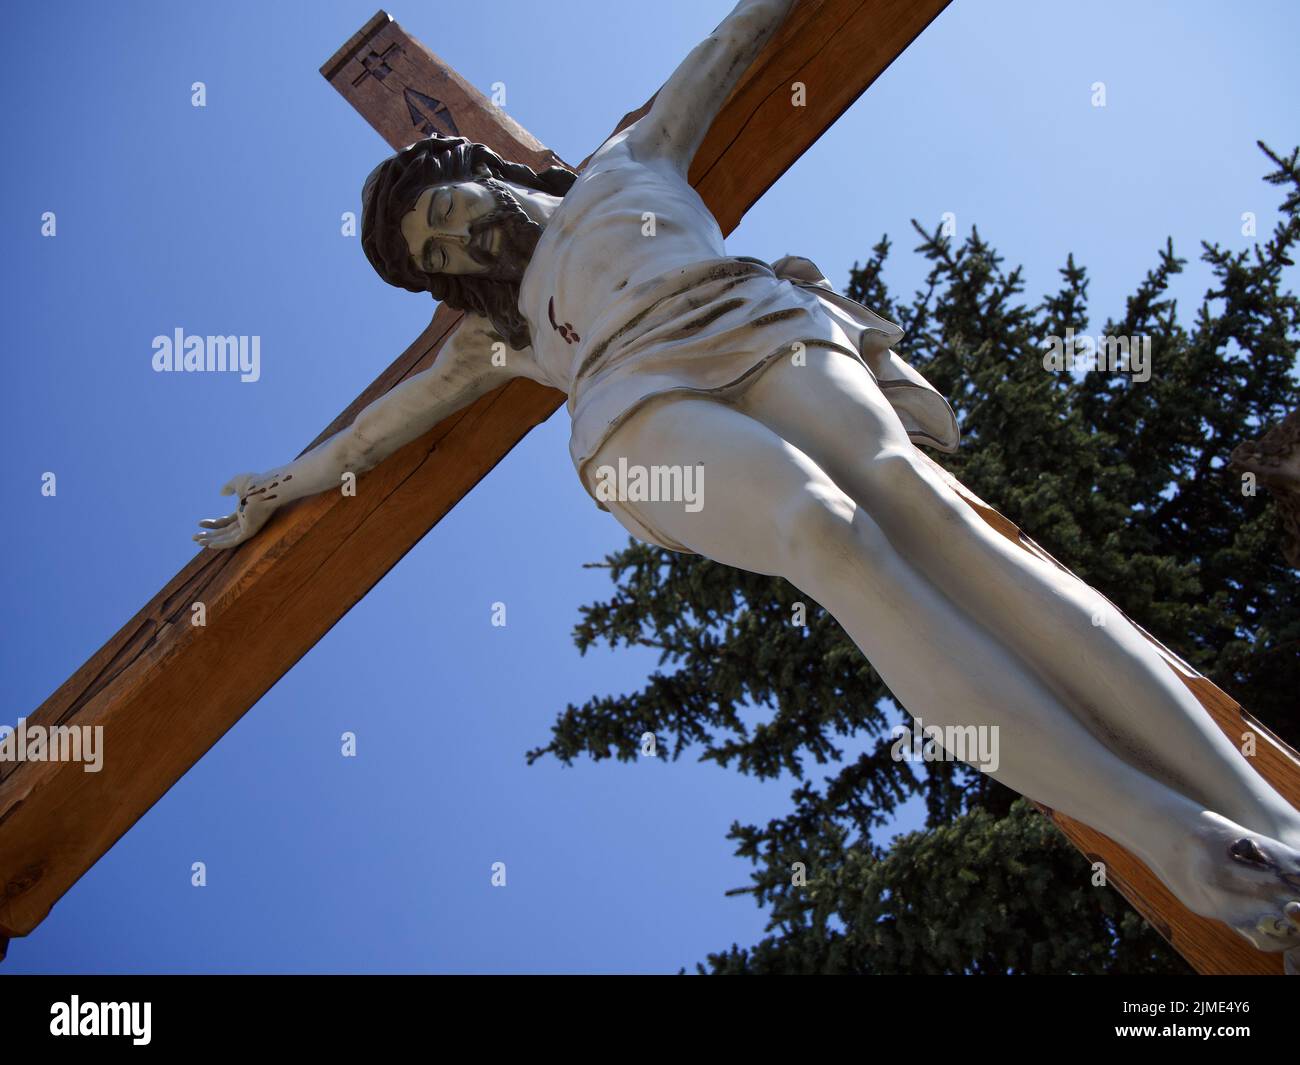 A sculptural image of the crucified Jesus Christ against a clear sky. Bottom view. Stock Photo